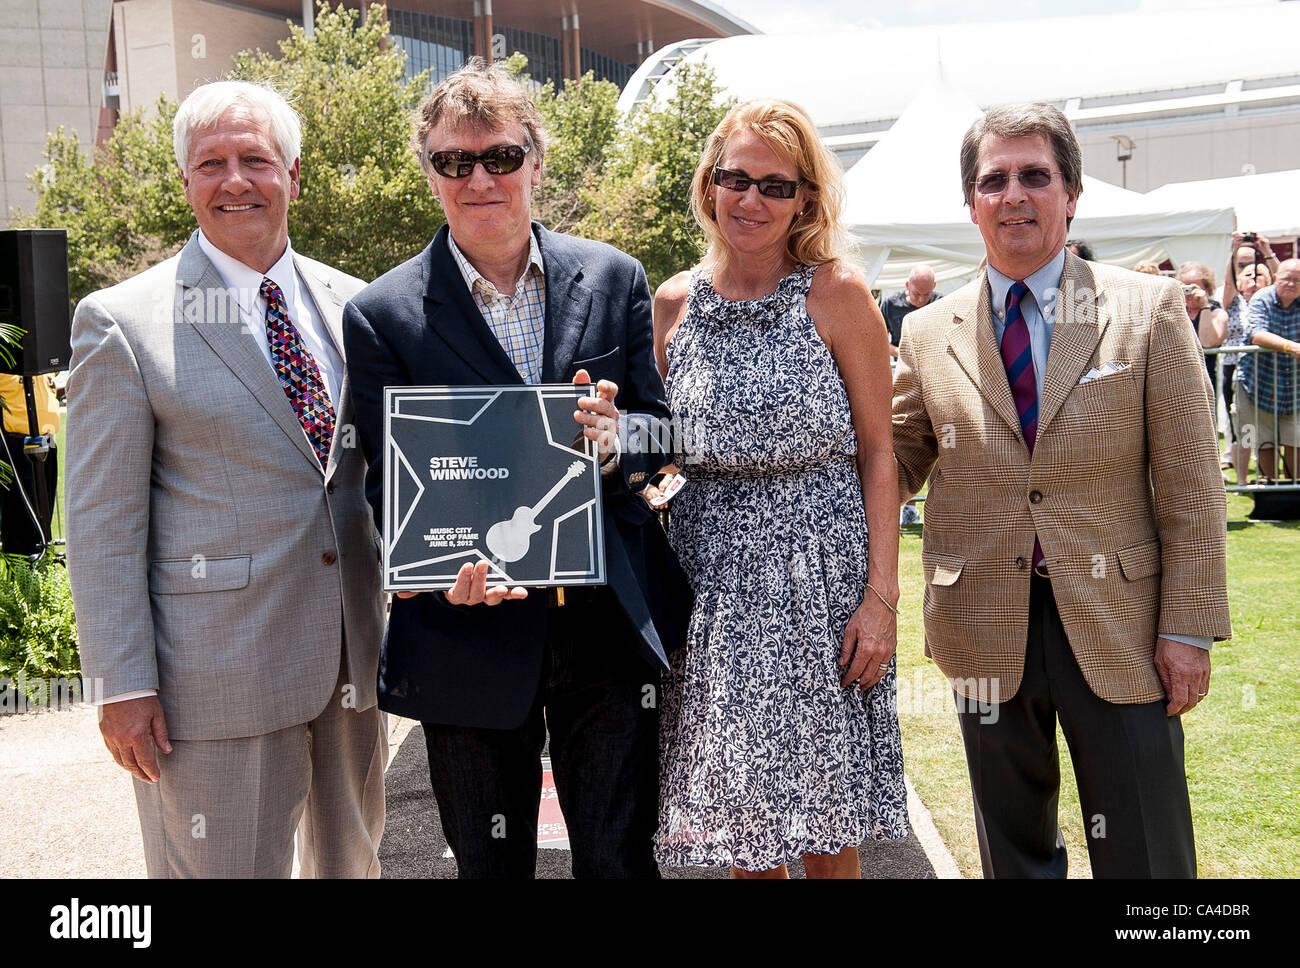 Jun 5, 2012 - Nashville, Tennessee; USA - (L-R) Dr. BOB FISHER Preseident of Belmont University, Musician STEVE WINWOOD,  EUGENIA WINWOOD and MARC STENGEL take part in the ceremony as Steve Winwood inducted into the Music City Walk of Fame that is located in Downtown Nashville.  Copyright 2012 Jason Stock Photo